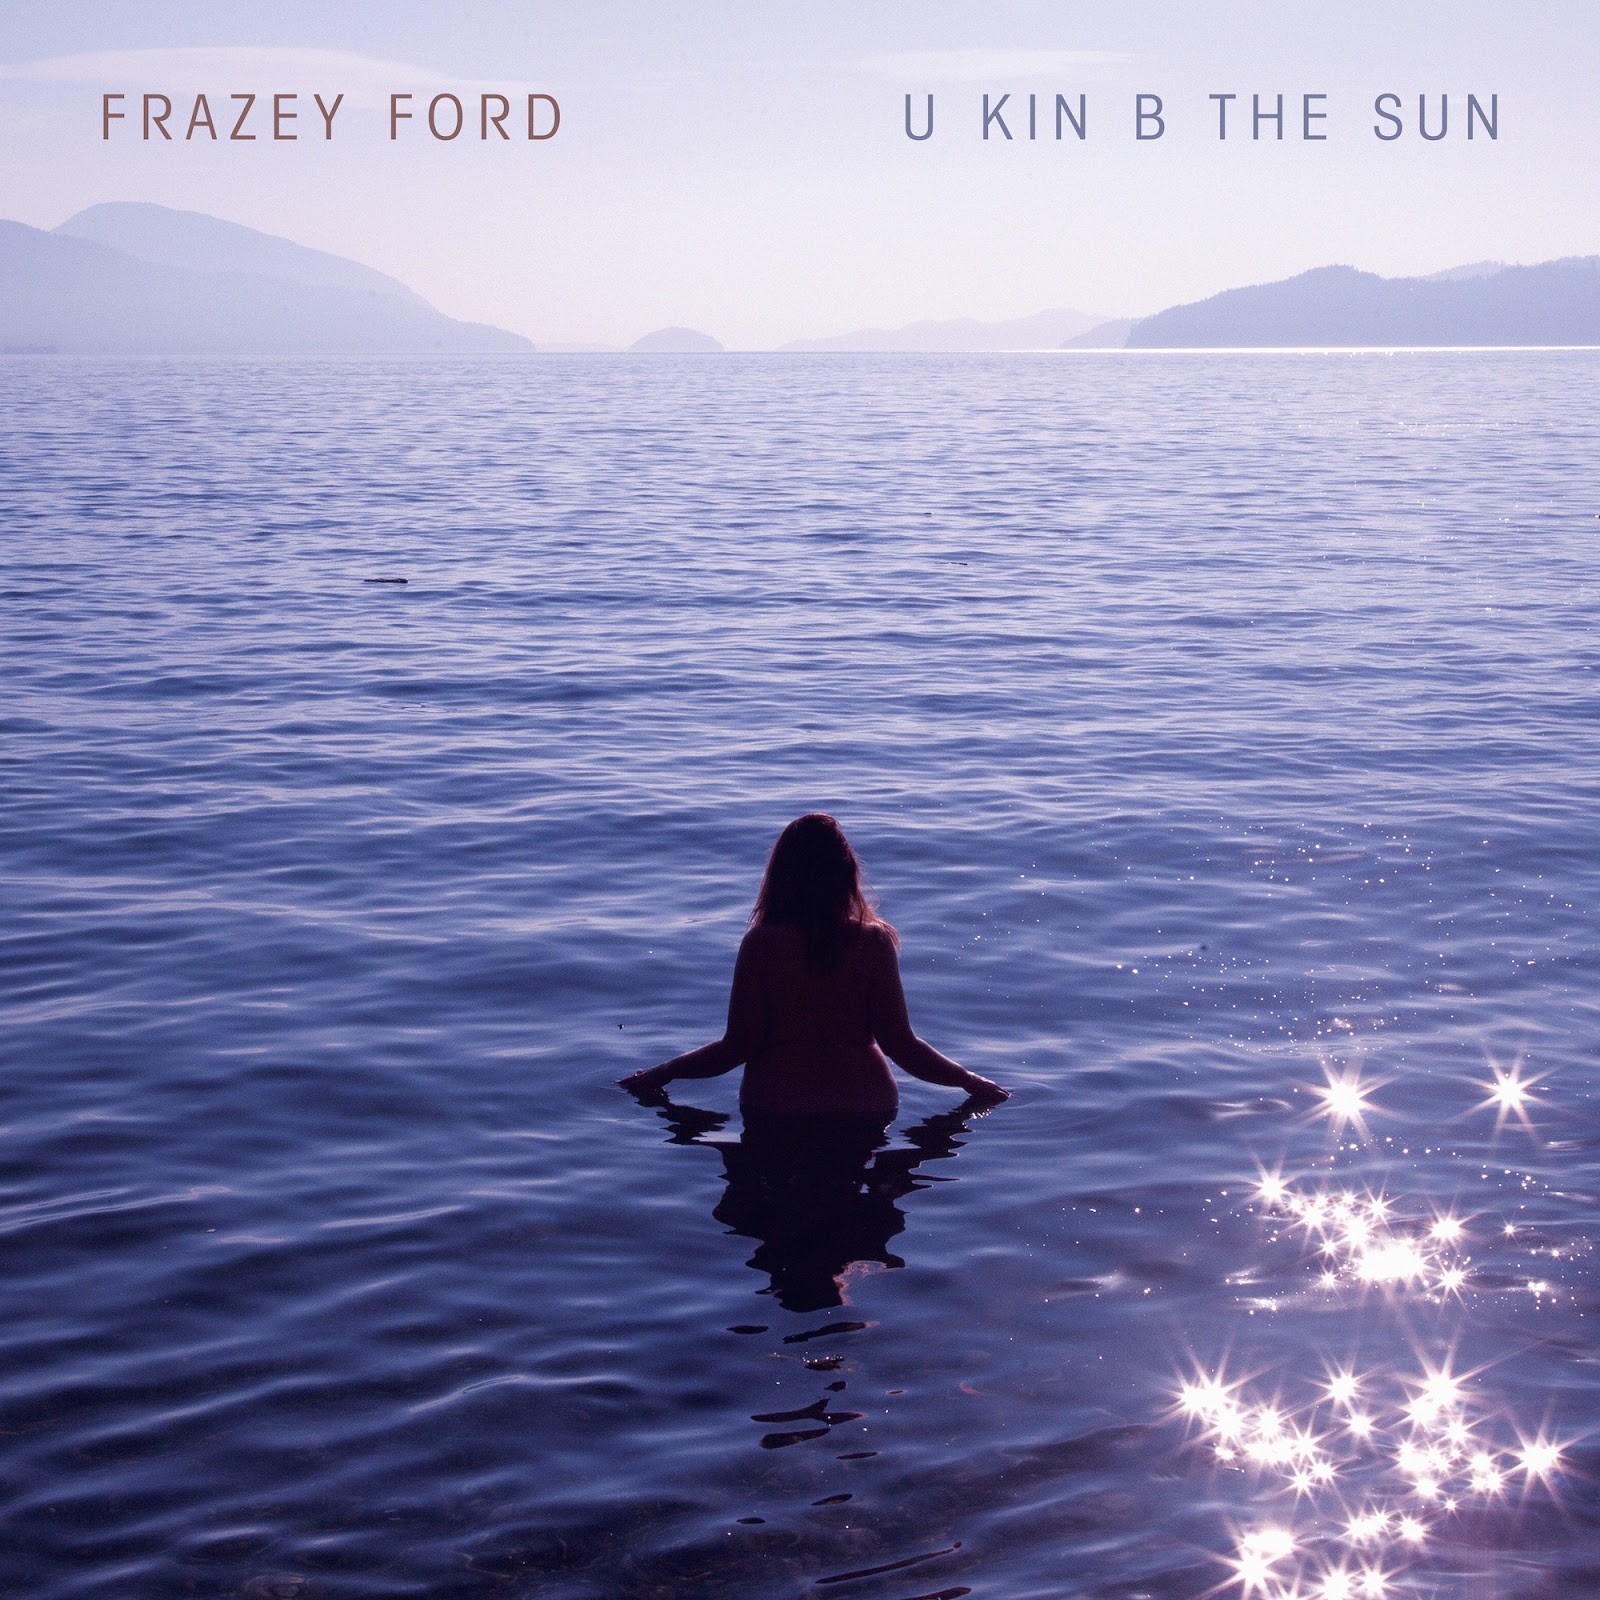 Frazey Ford, recently announced her third album U kin B the Sun, will come out on February 7, via Arts & Crafts. Ford made a point of preserving